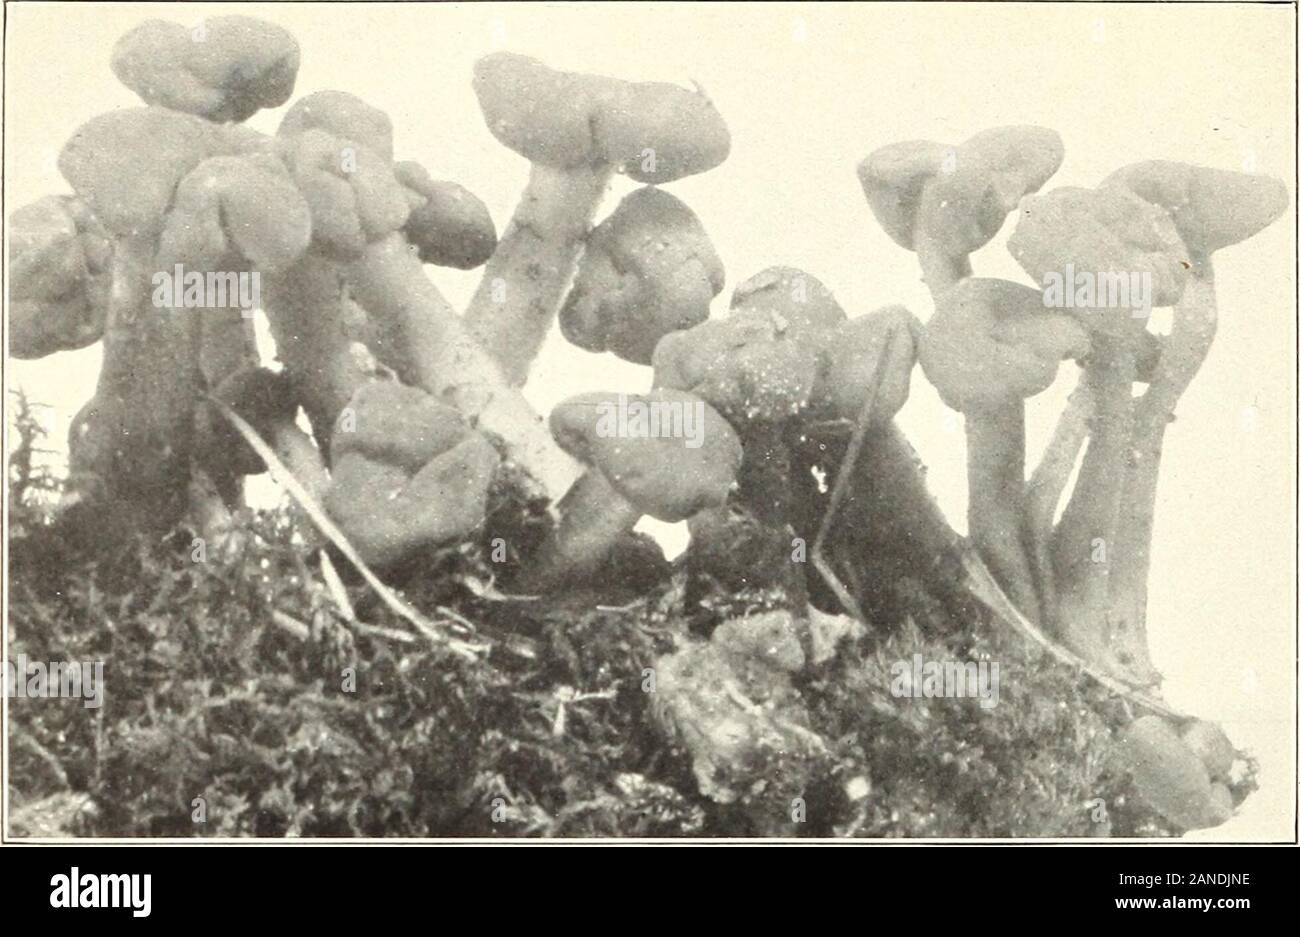 Mushrooms and other common fungi . Fig. 2.—Ithyphallus impudicus. Bui. 175, U. S. Dept. of Agriculture. Plate XXXV!!!. Fig. 1.—Leotia lubrica. Stock Photo